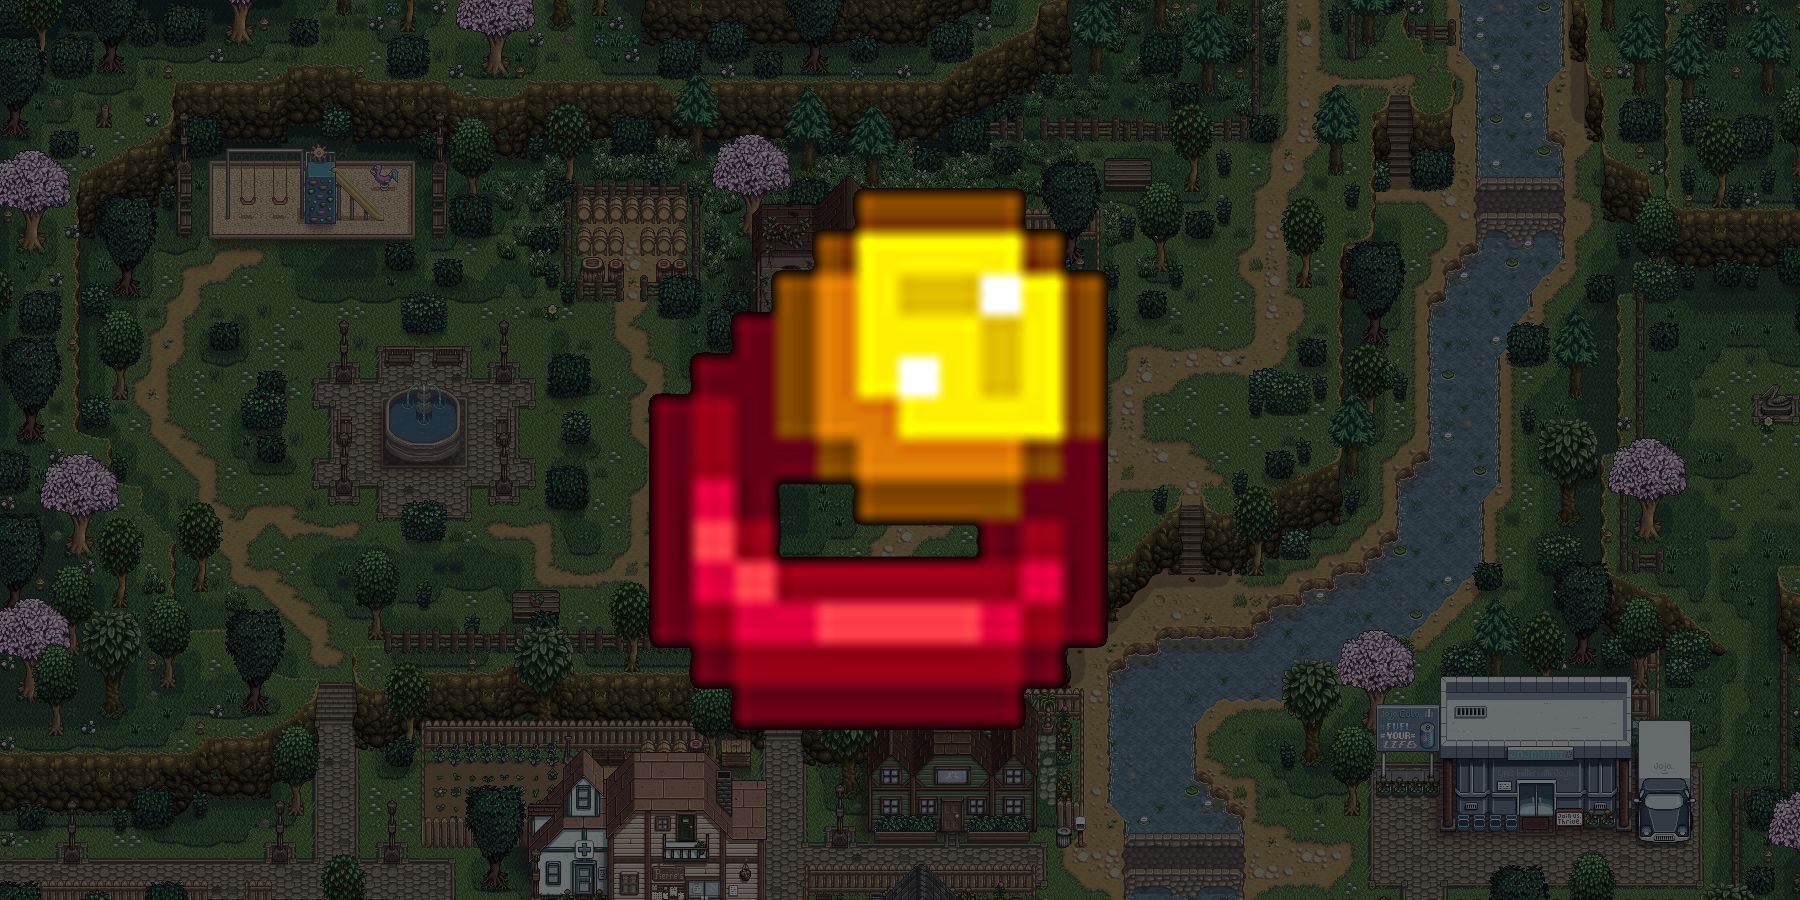 The Special Charm in Stardew Valley